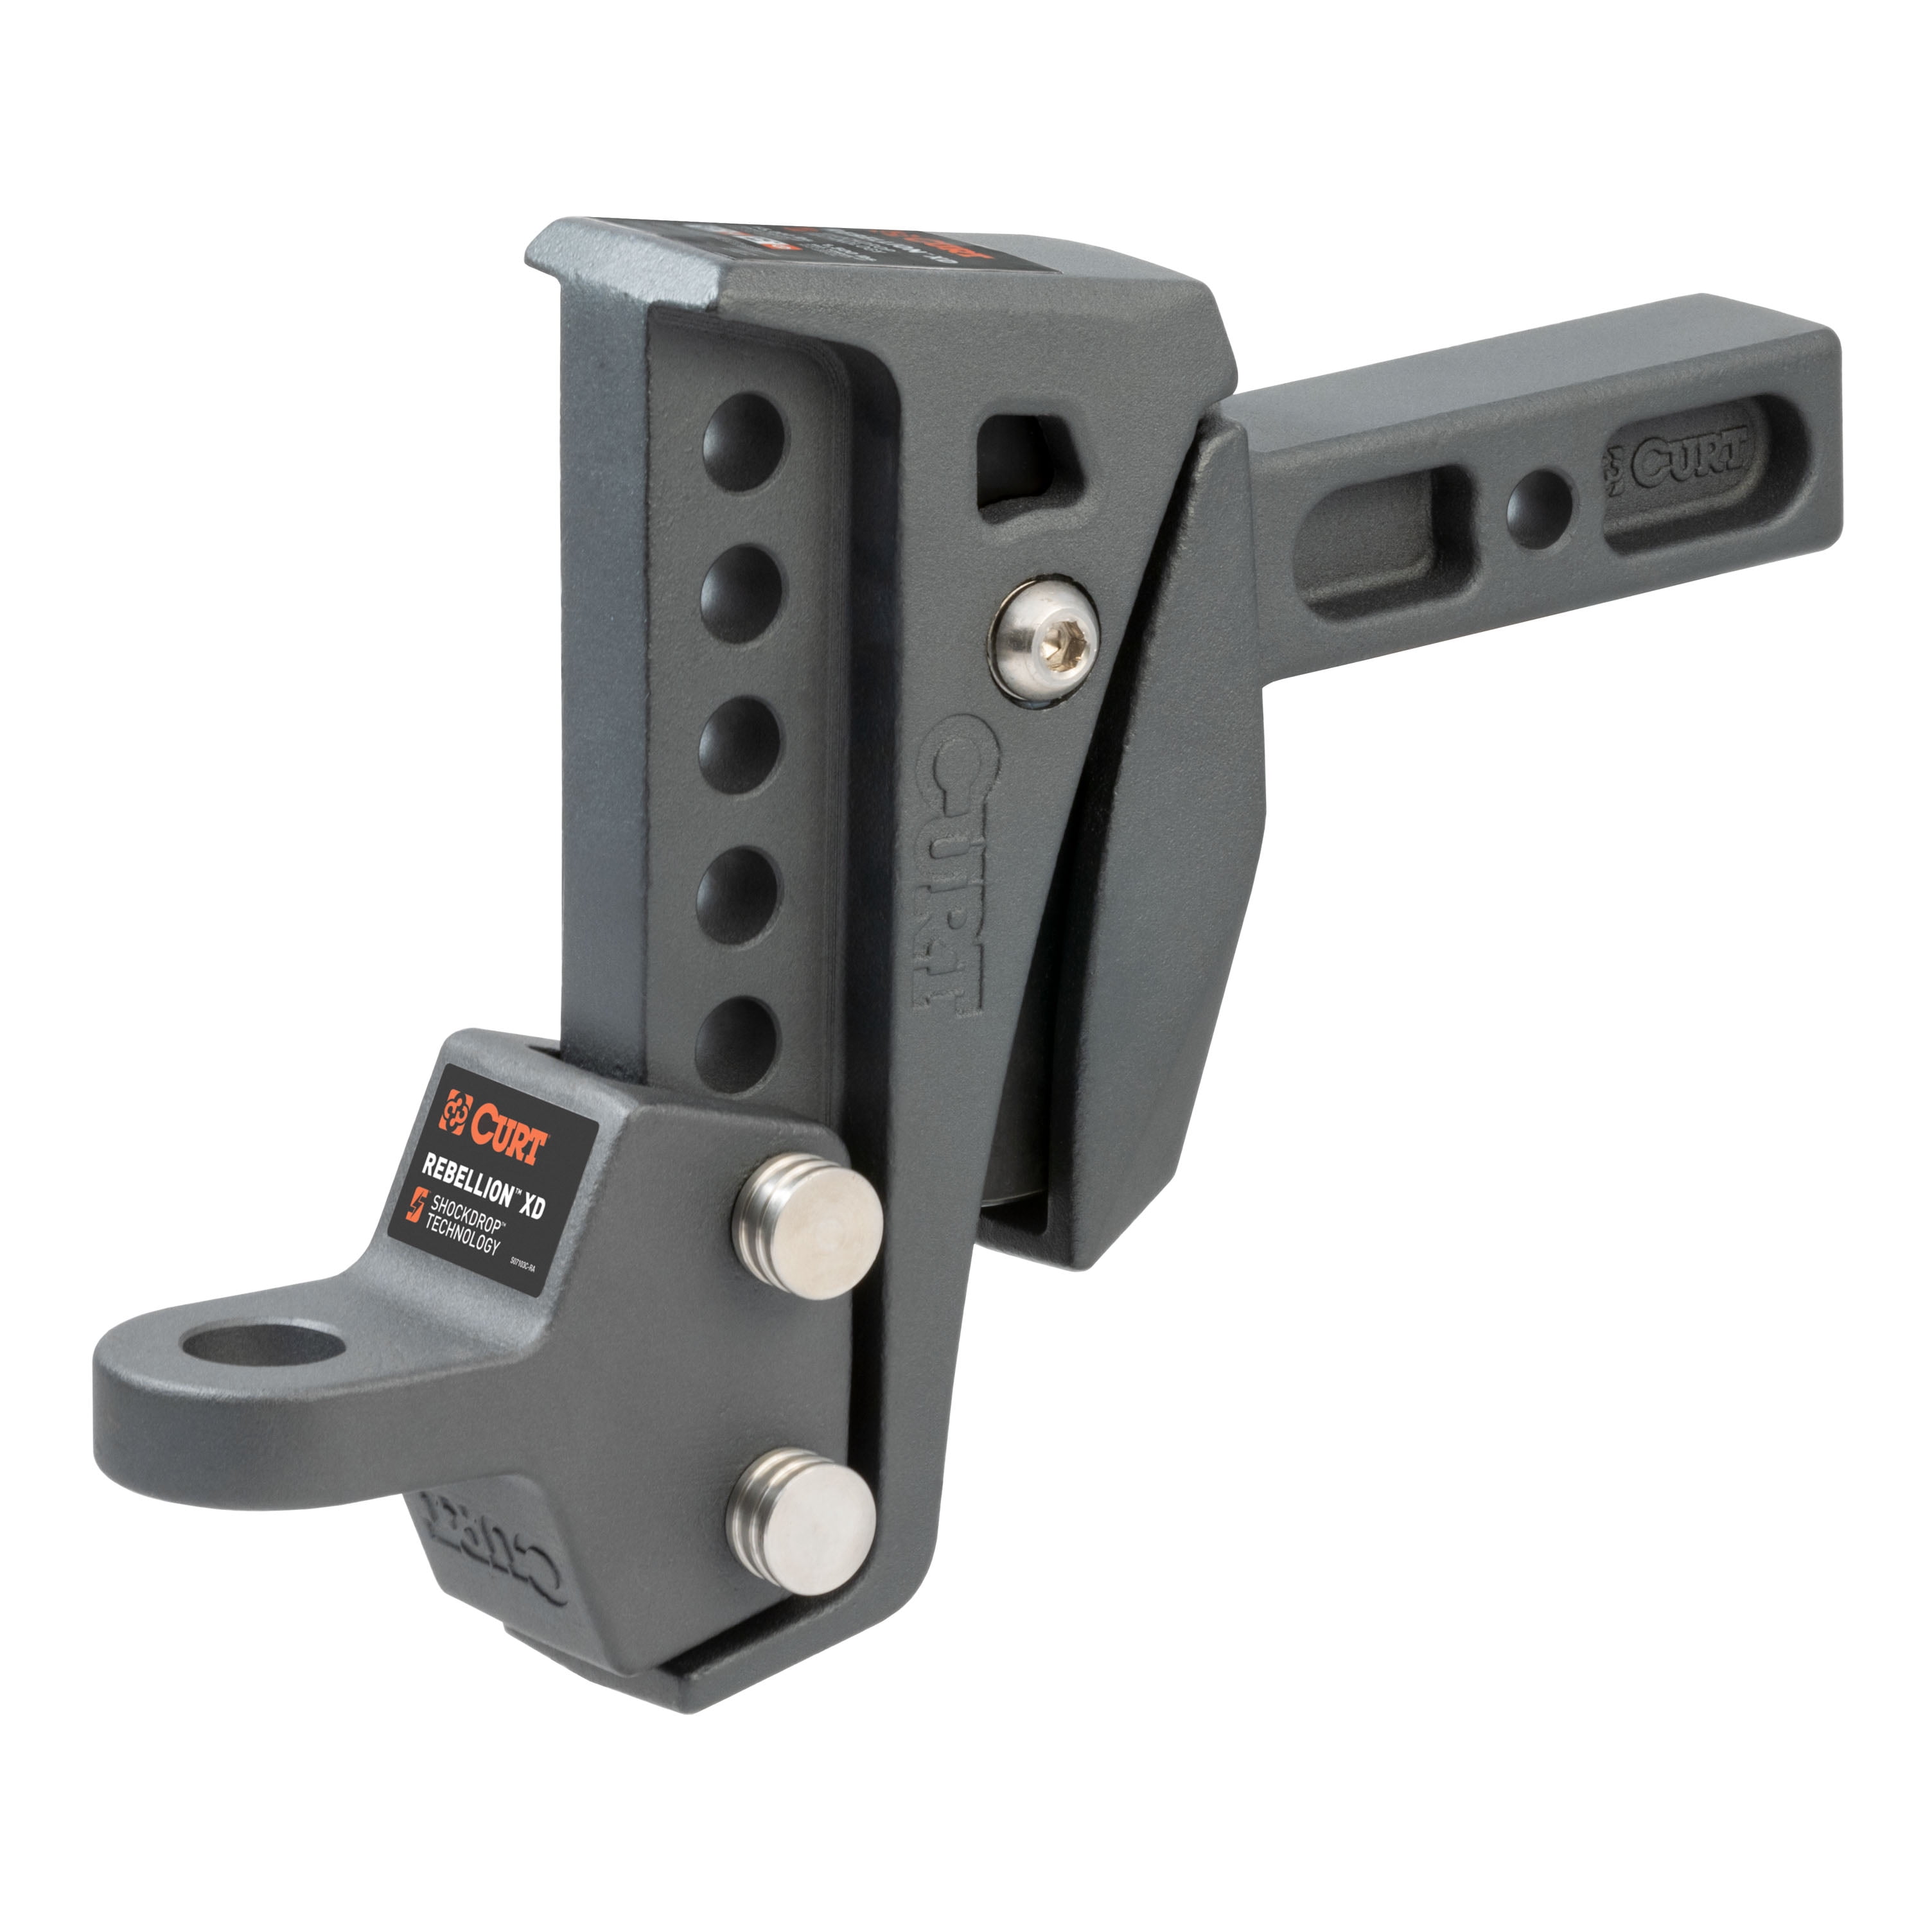 Fits 2-1/2 Hitch Shocker XRC Cushion Hitch Adjustable Ball Mount 4 Rise to 4 Drop Has 2 Ball 